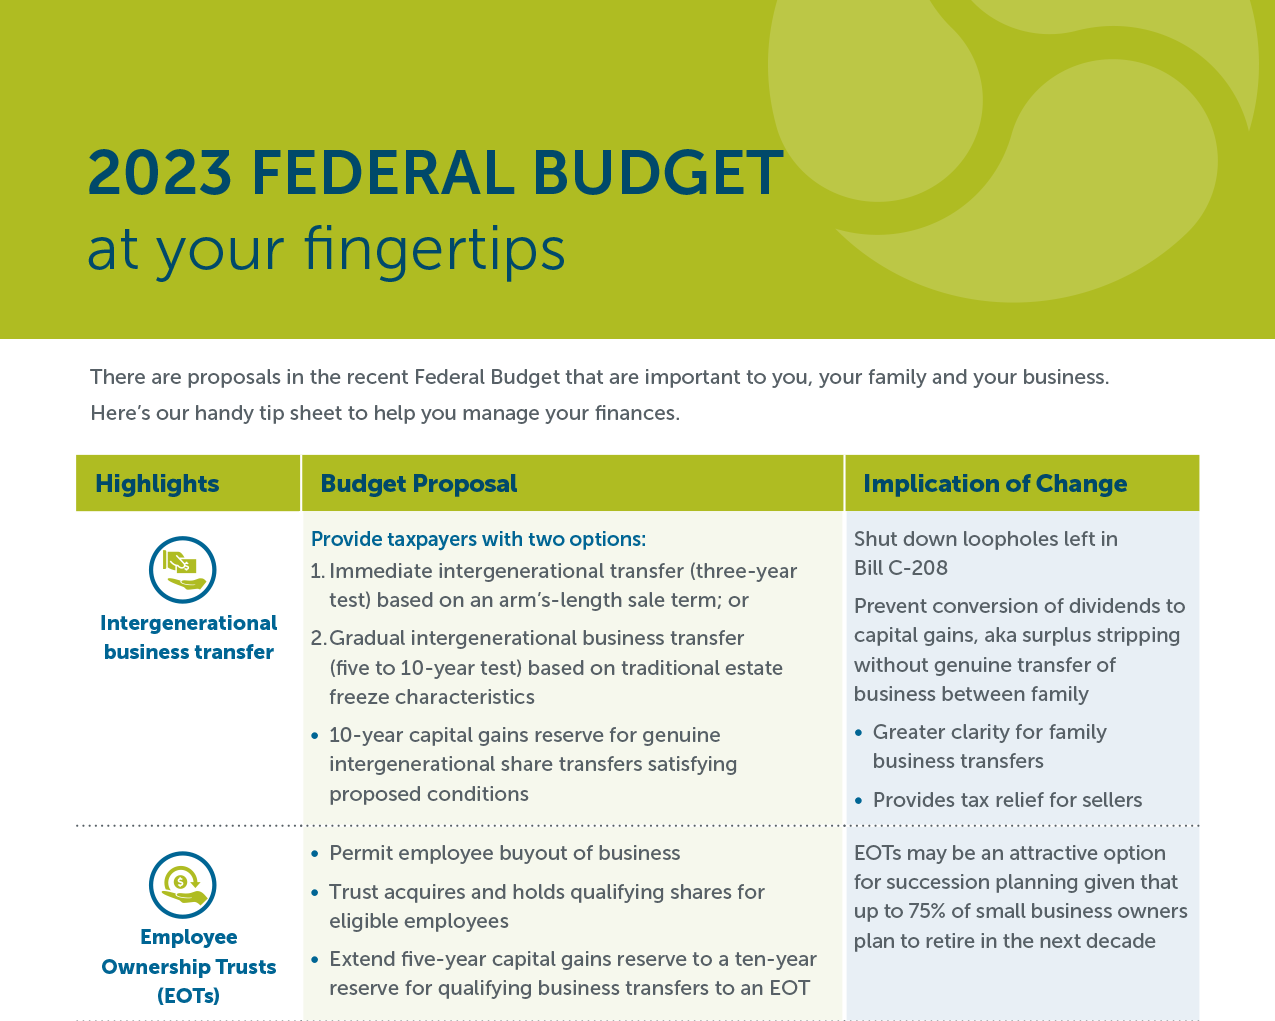 2023 Federal Budget @ your fingertips